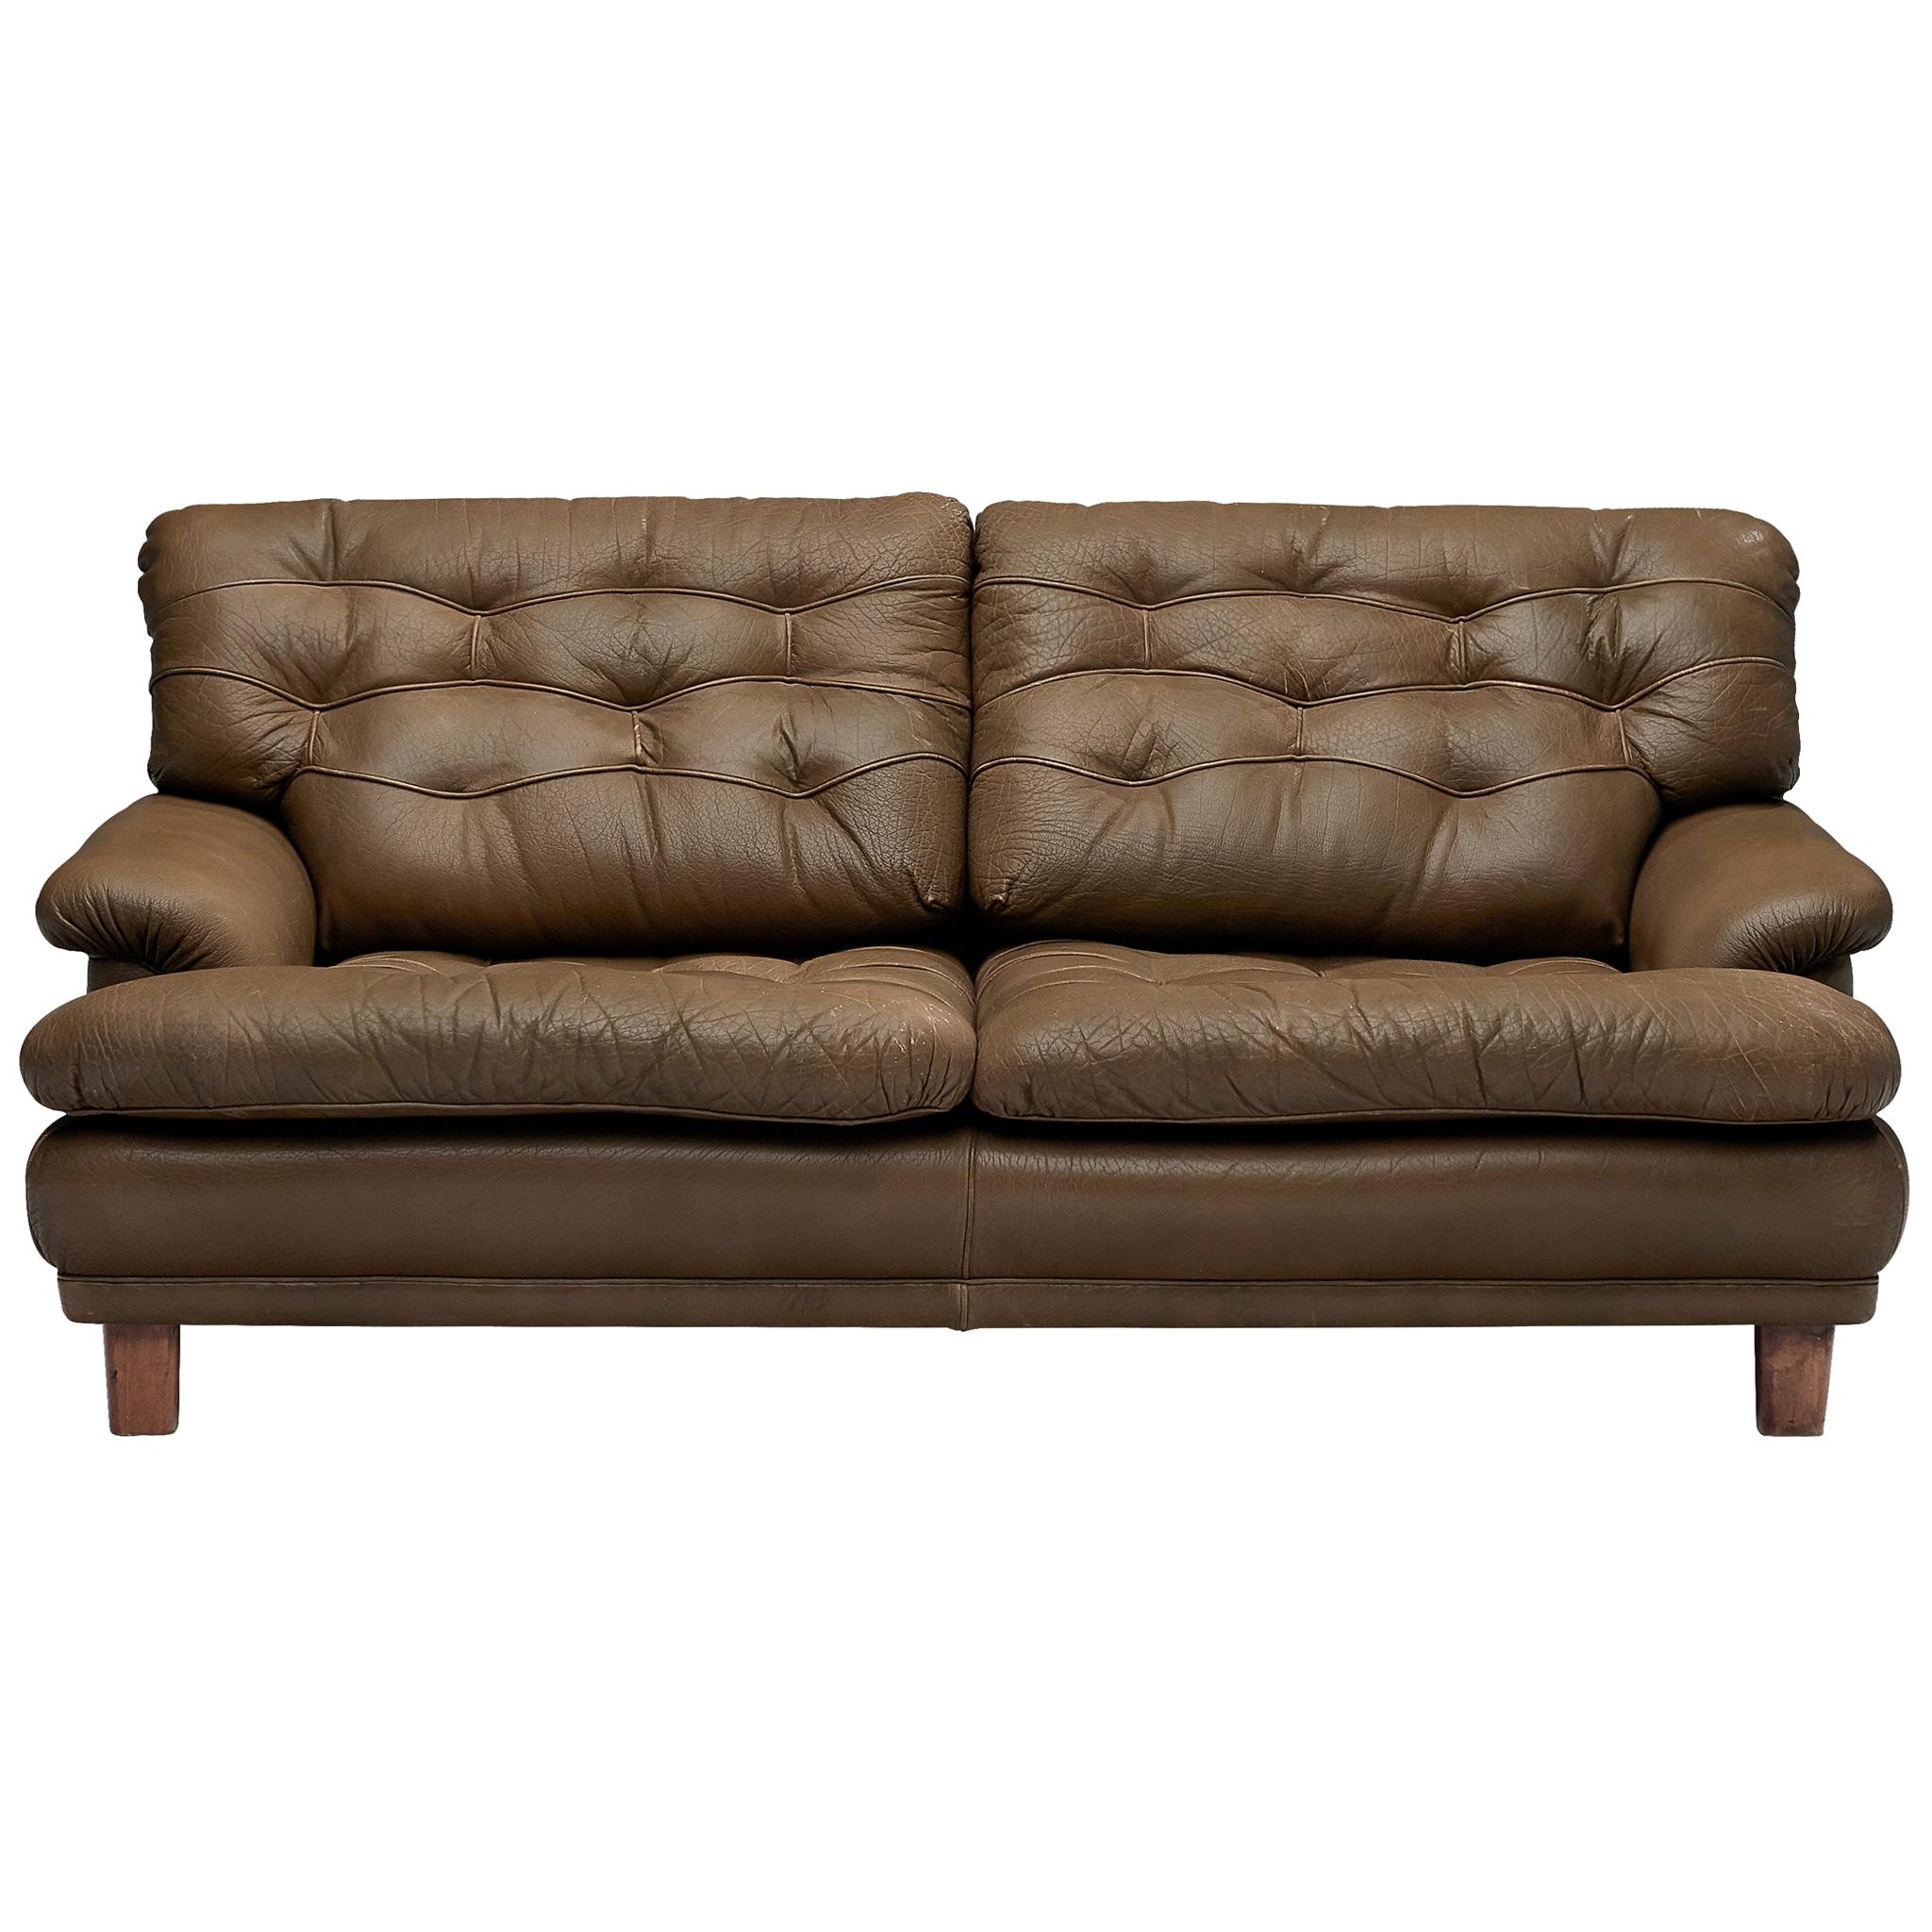 Arne Norell Two-Seater Sofa in Patinated Olive Green Leather For Sale